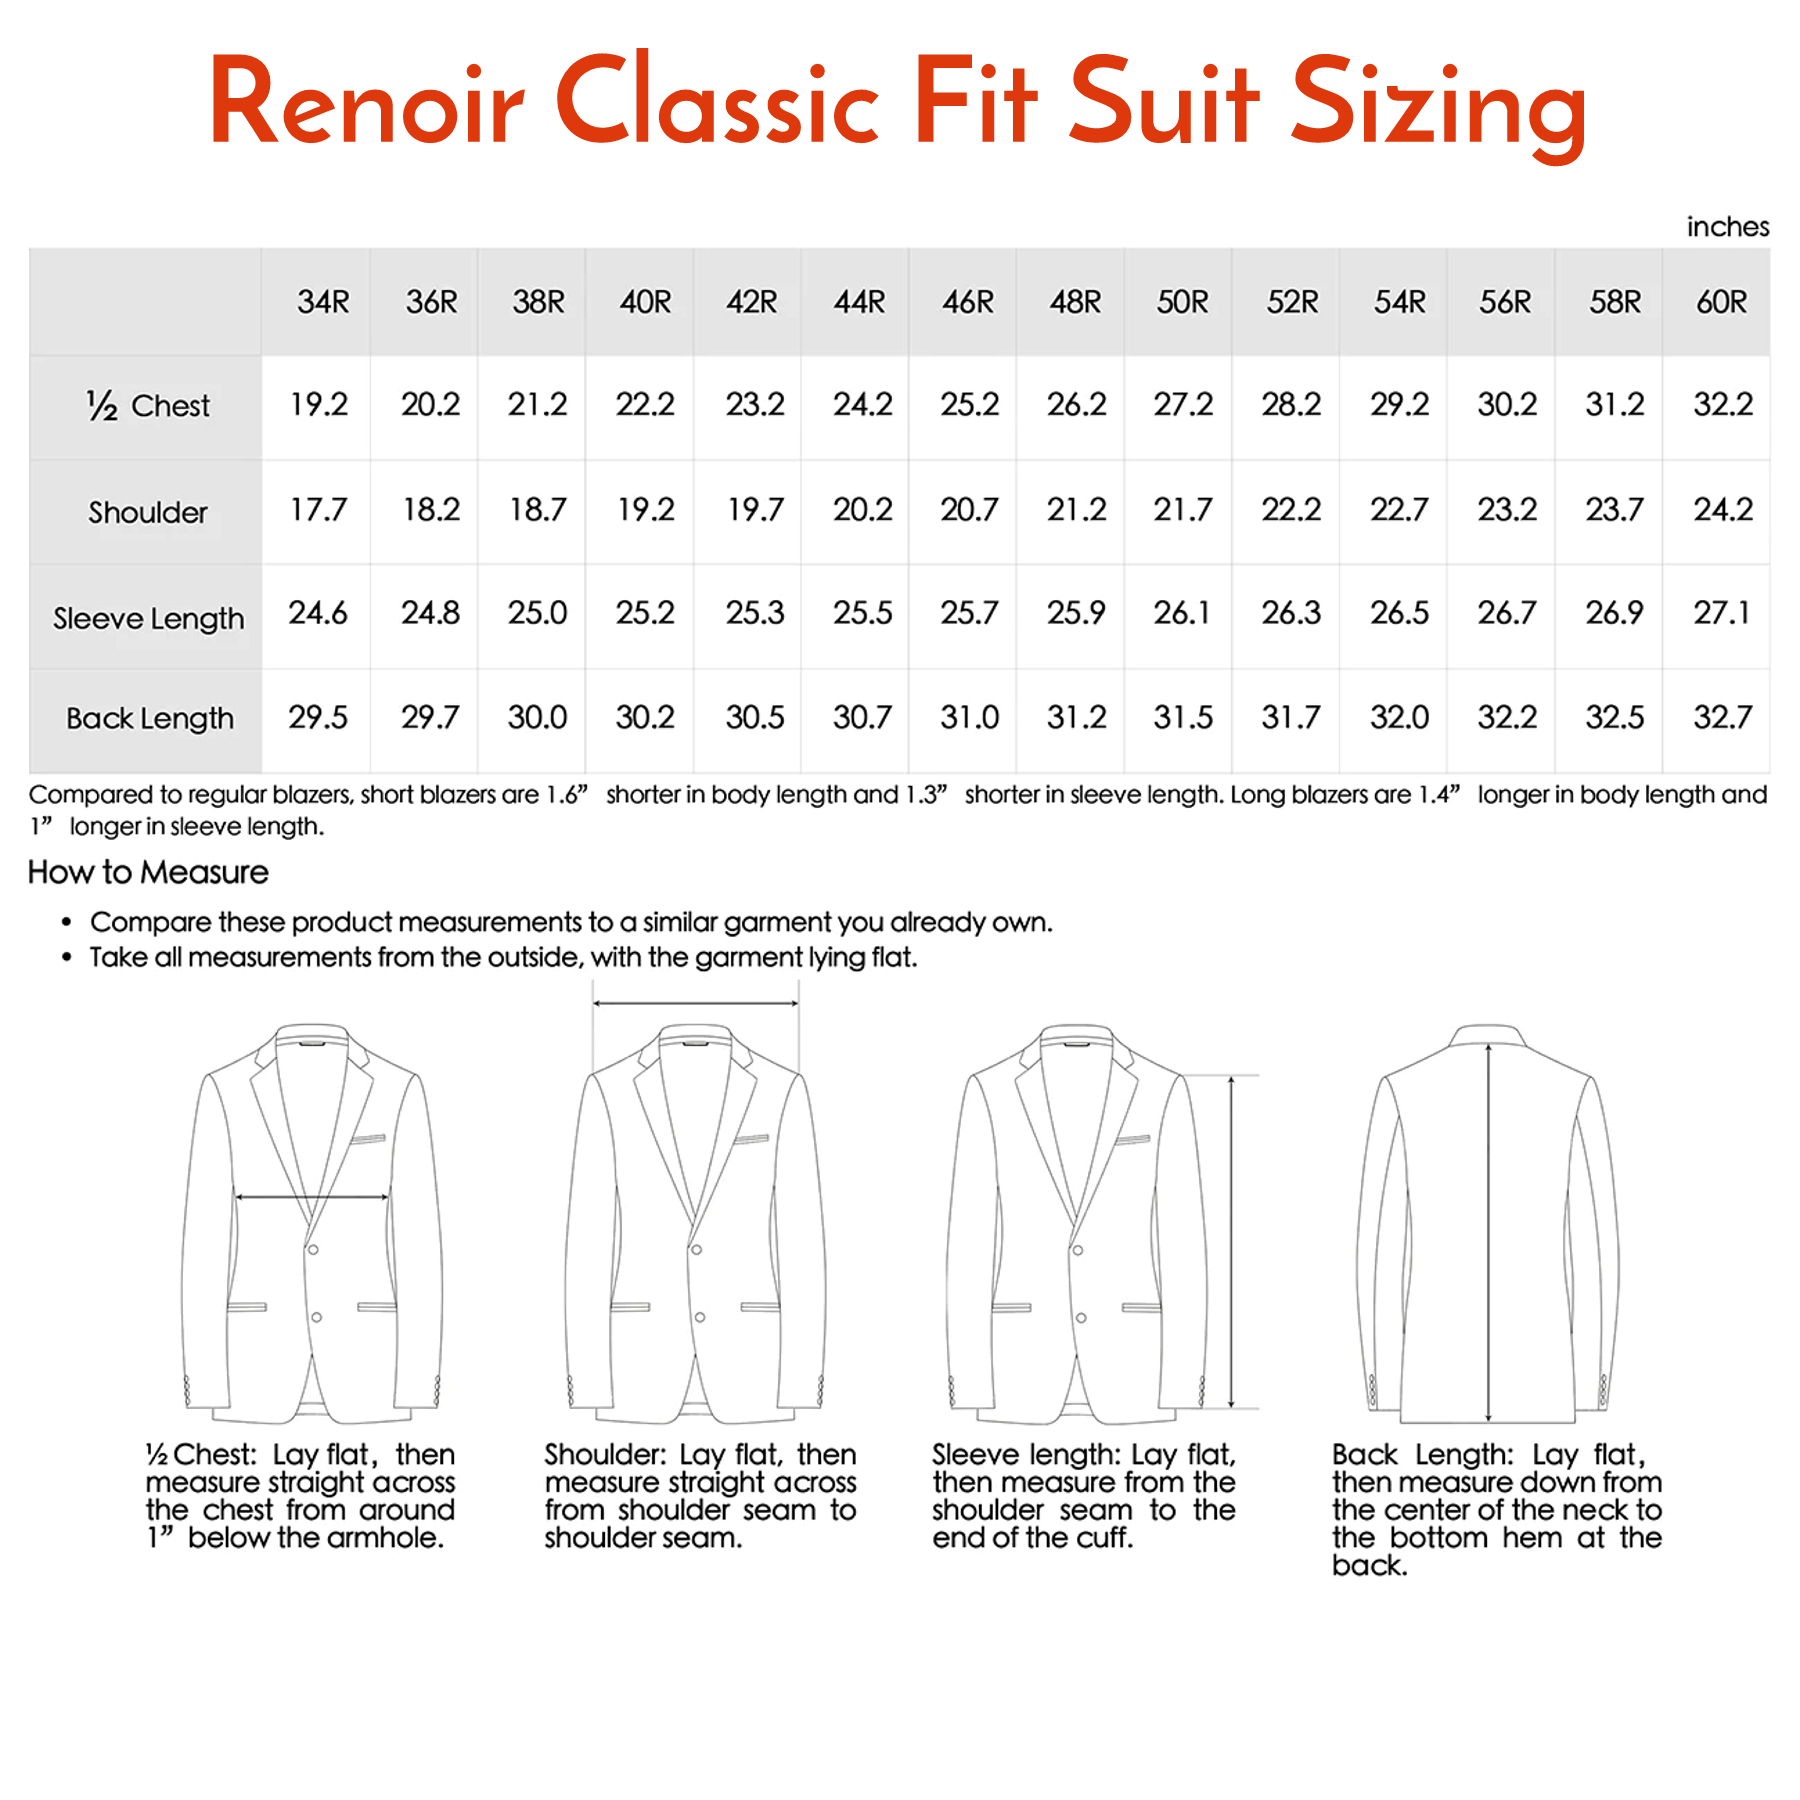 Super 140s Wool Single Breasted CLASSIC FIT Blazer in Black (Short, Regular, and Long Available) by Renoir